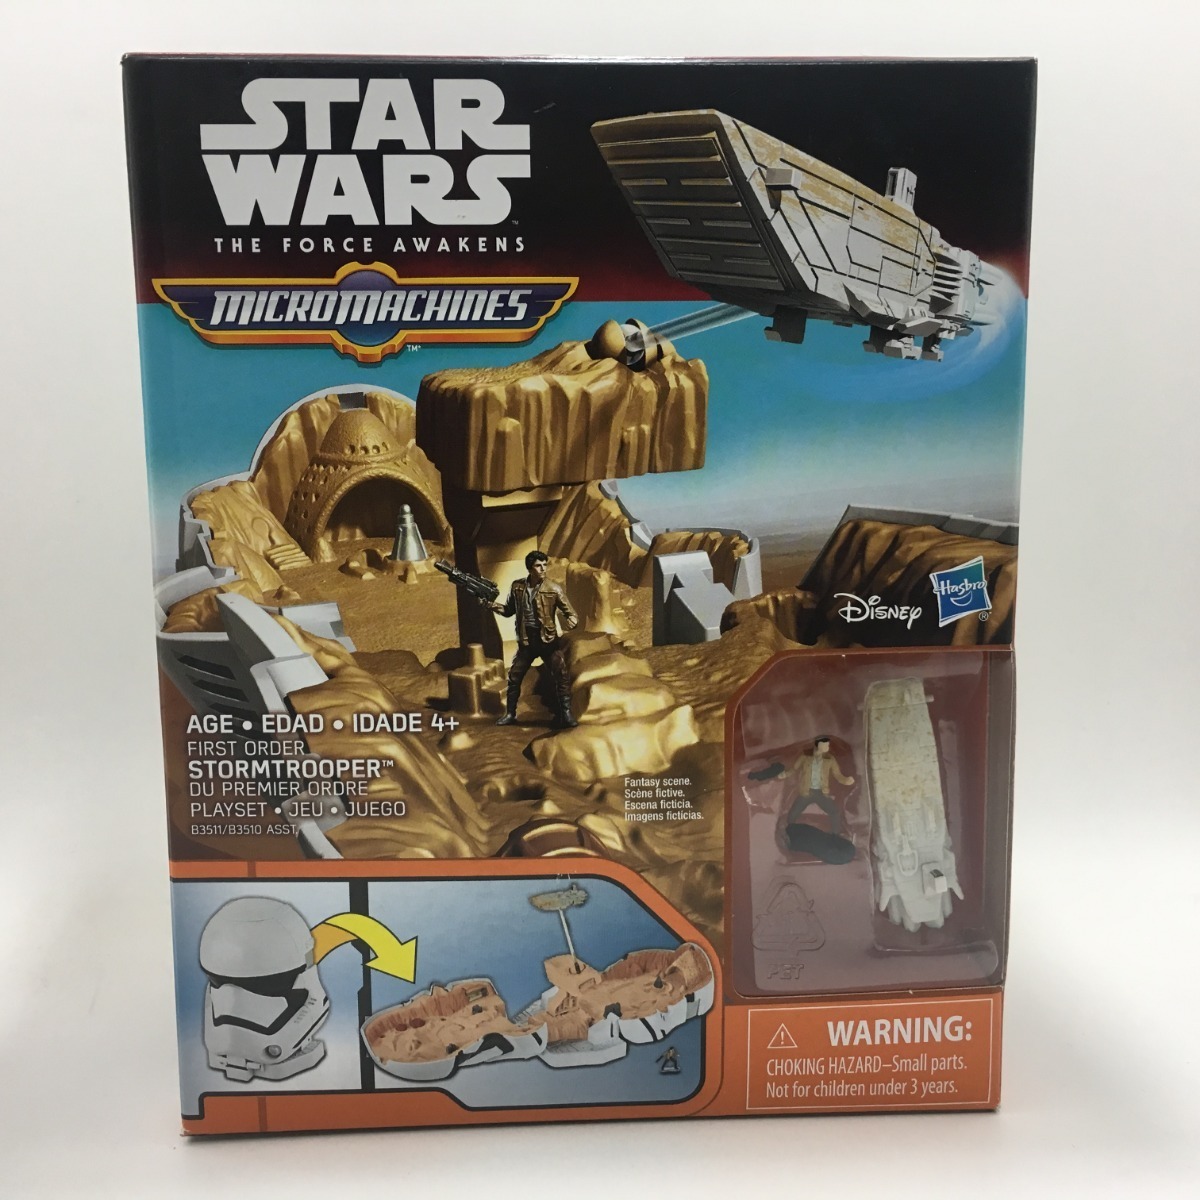 Details about   STAR WARS THE FORCE AWAKENS MICRO MACHINES FIRST ORDER STORMTROOPER 